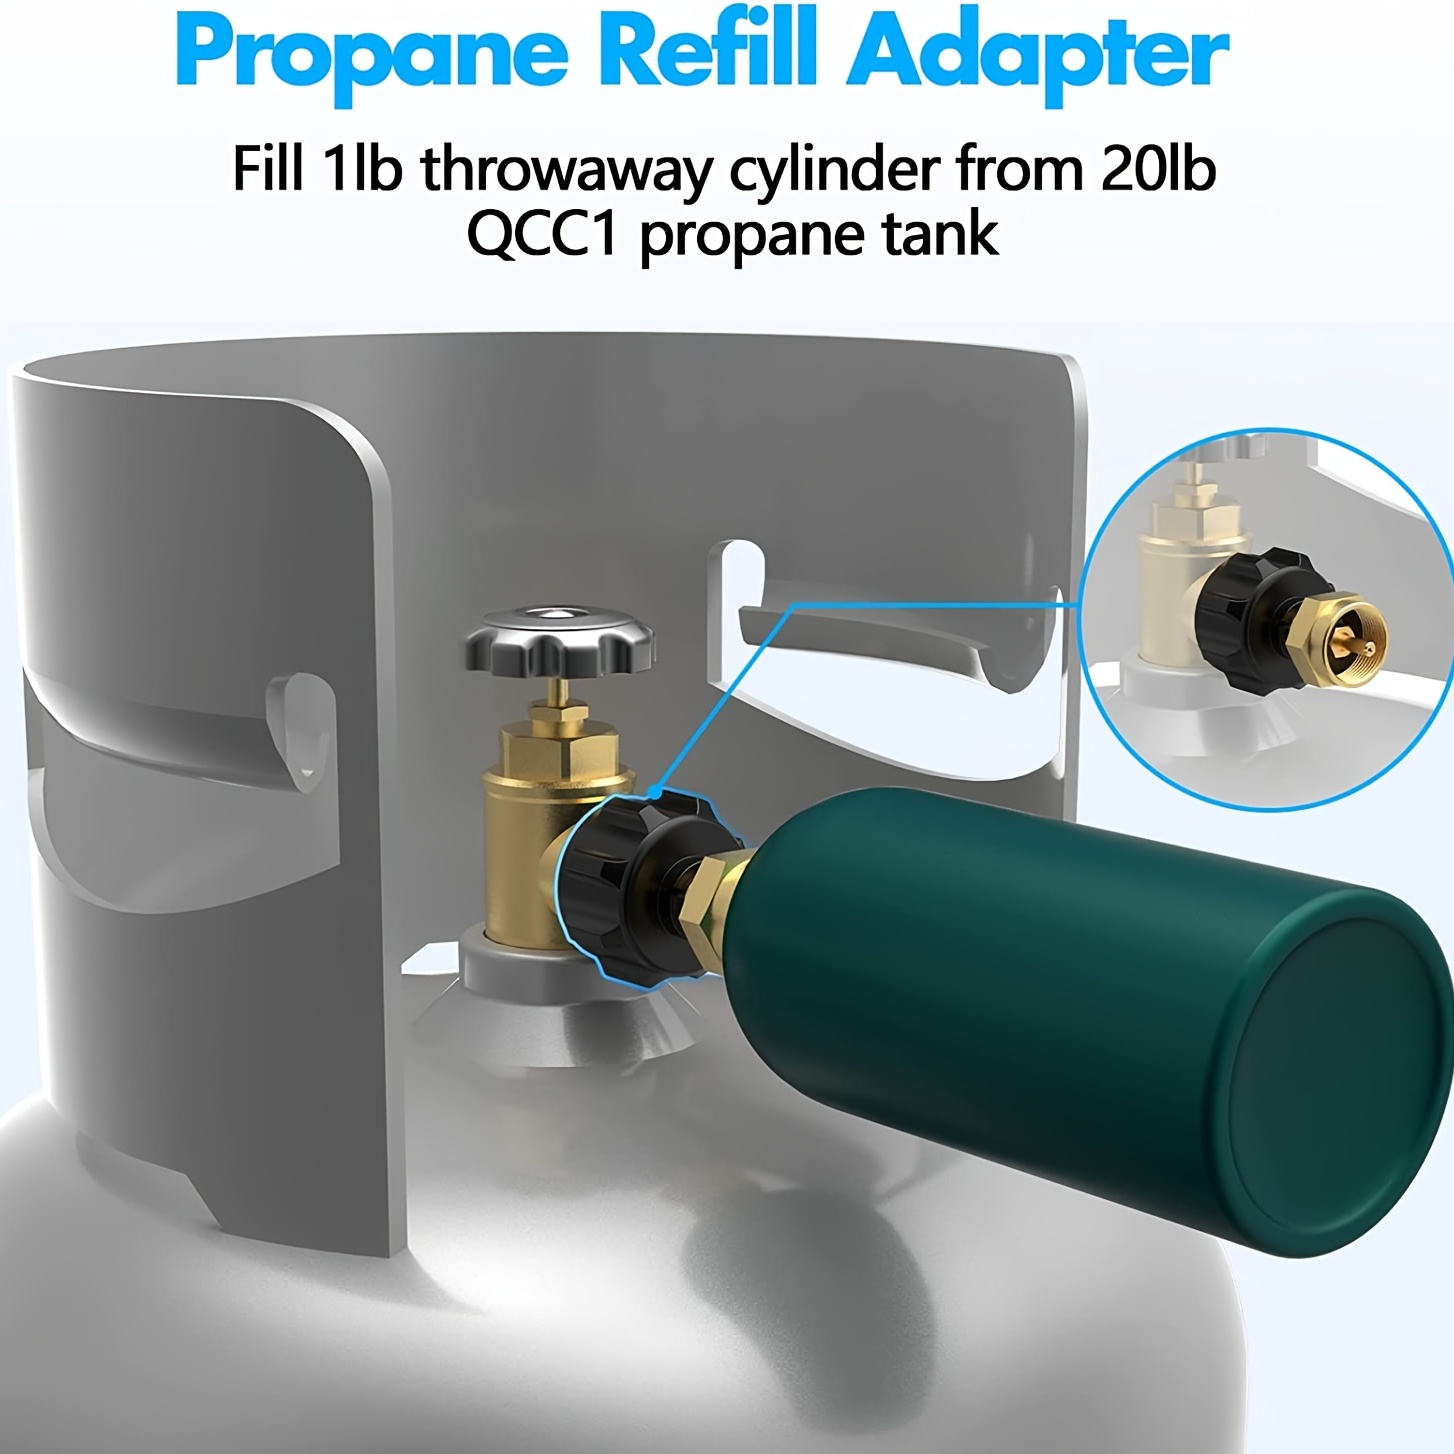 SHINESTAR Propane Tank Refill Adapter for QCC1/Type1 Propane Tank, Solid  Brass Regulator Valve Accessory for 1 LB Tank Throwaway Disposable Small  Cylinders : : Patio, Lawn & Garden